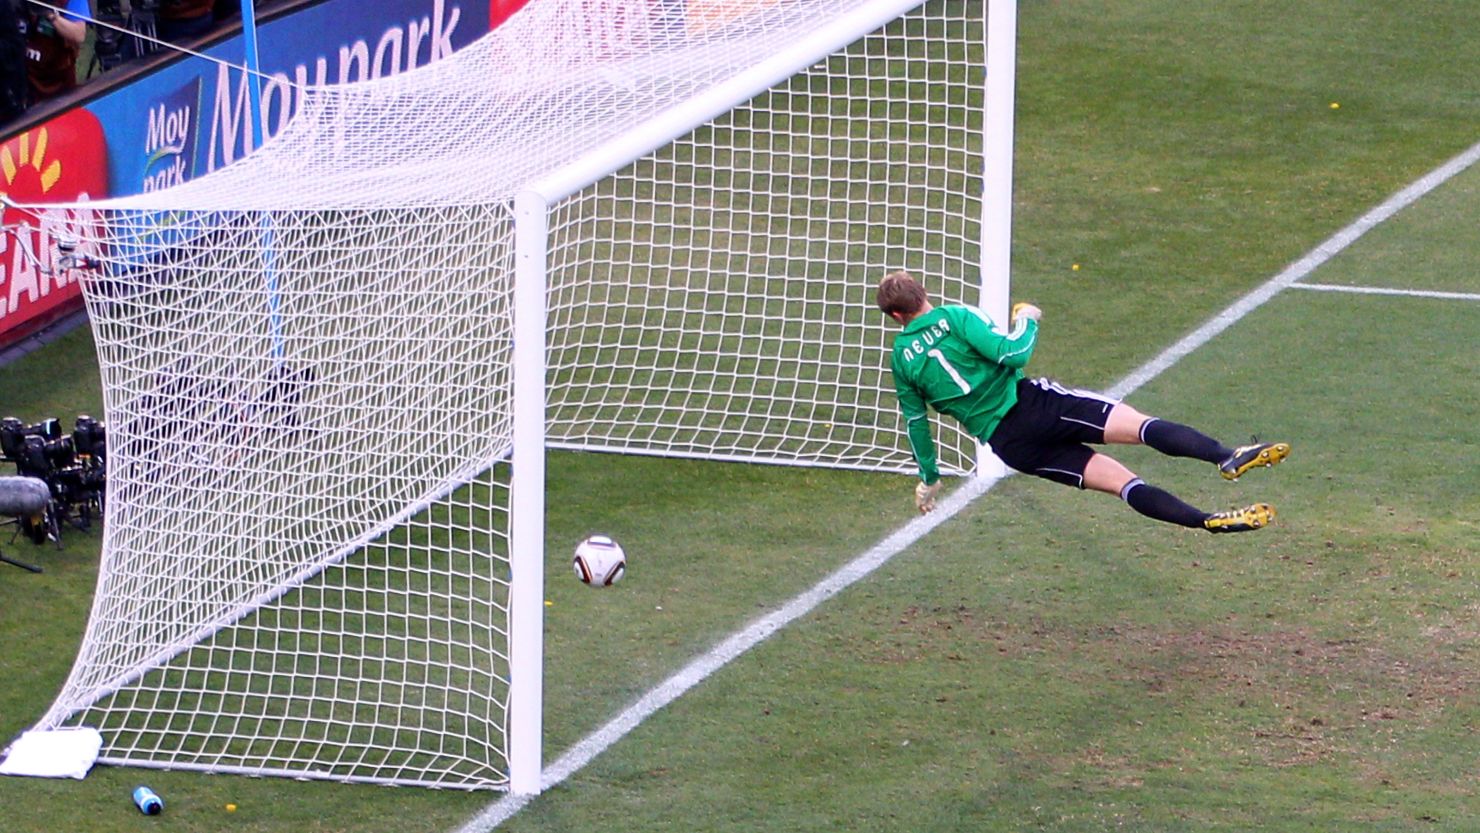 England were aggrieved after this shot from Frank Lampard against Germany in the 2010 World Cup was not awarded